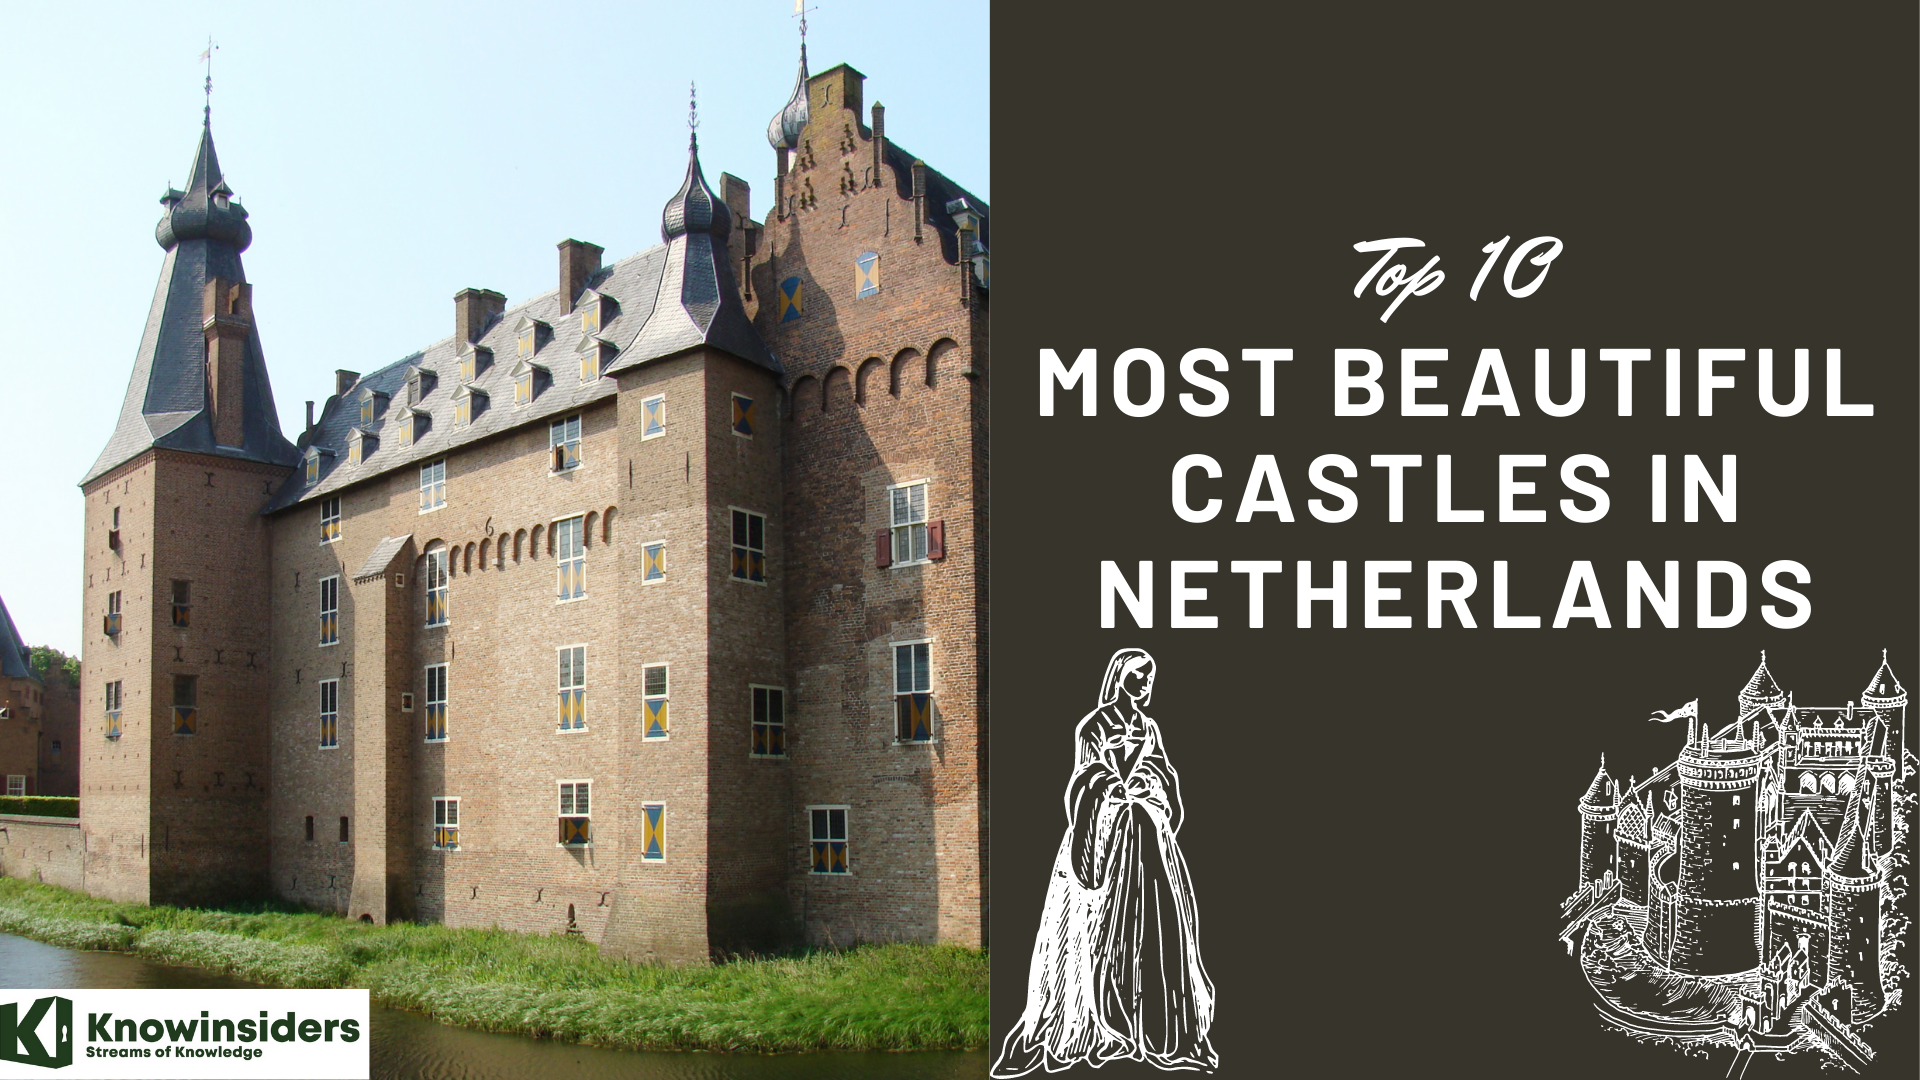 Top 10 most beautiful castles in Netherlands